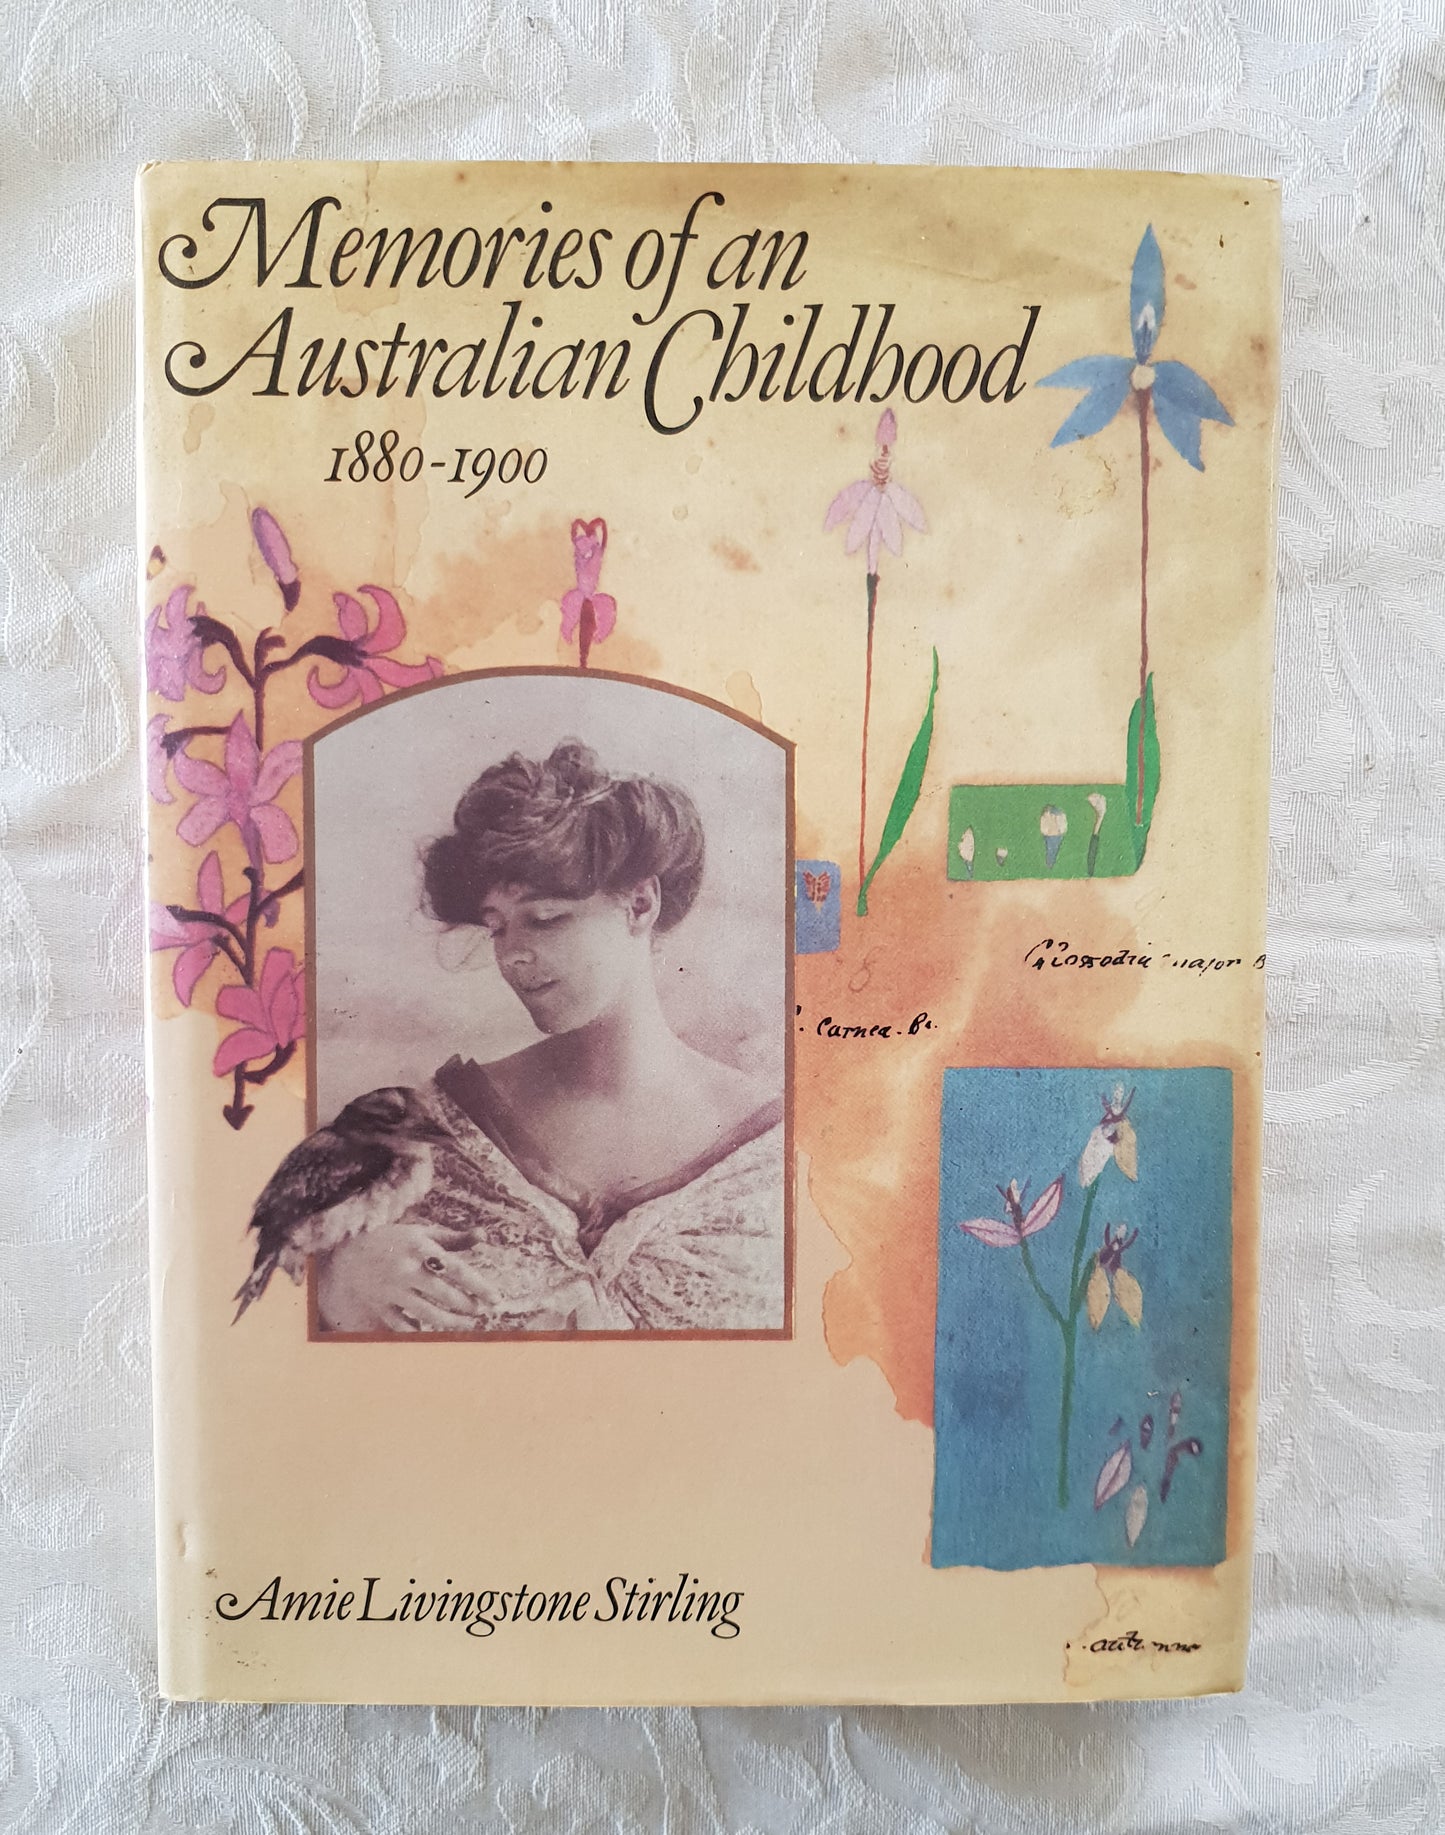 Memories of an Australian Childhood 1880-1900 by Amie Livingstone Stirling